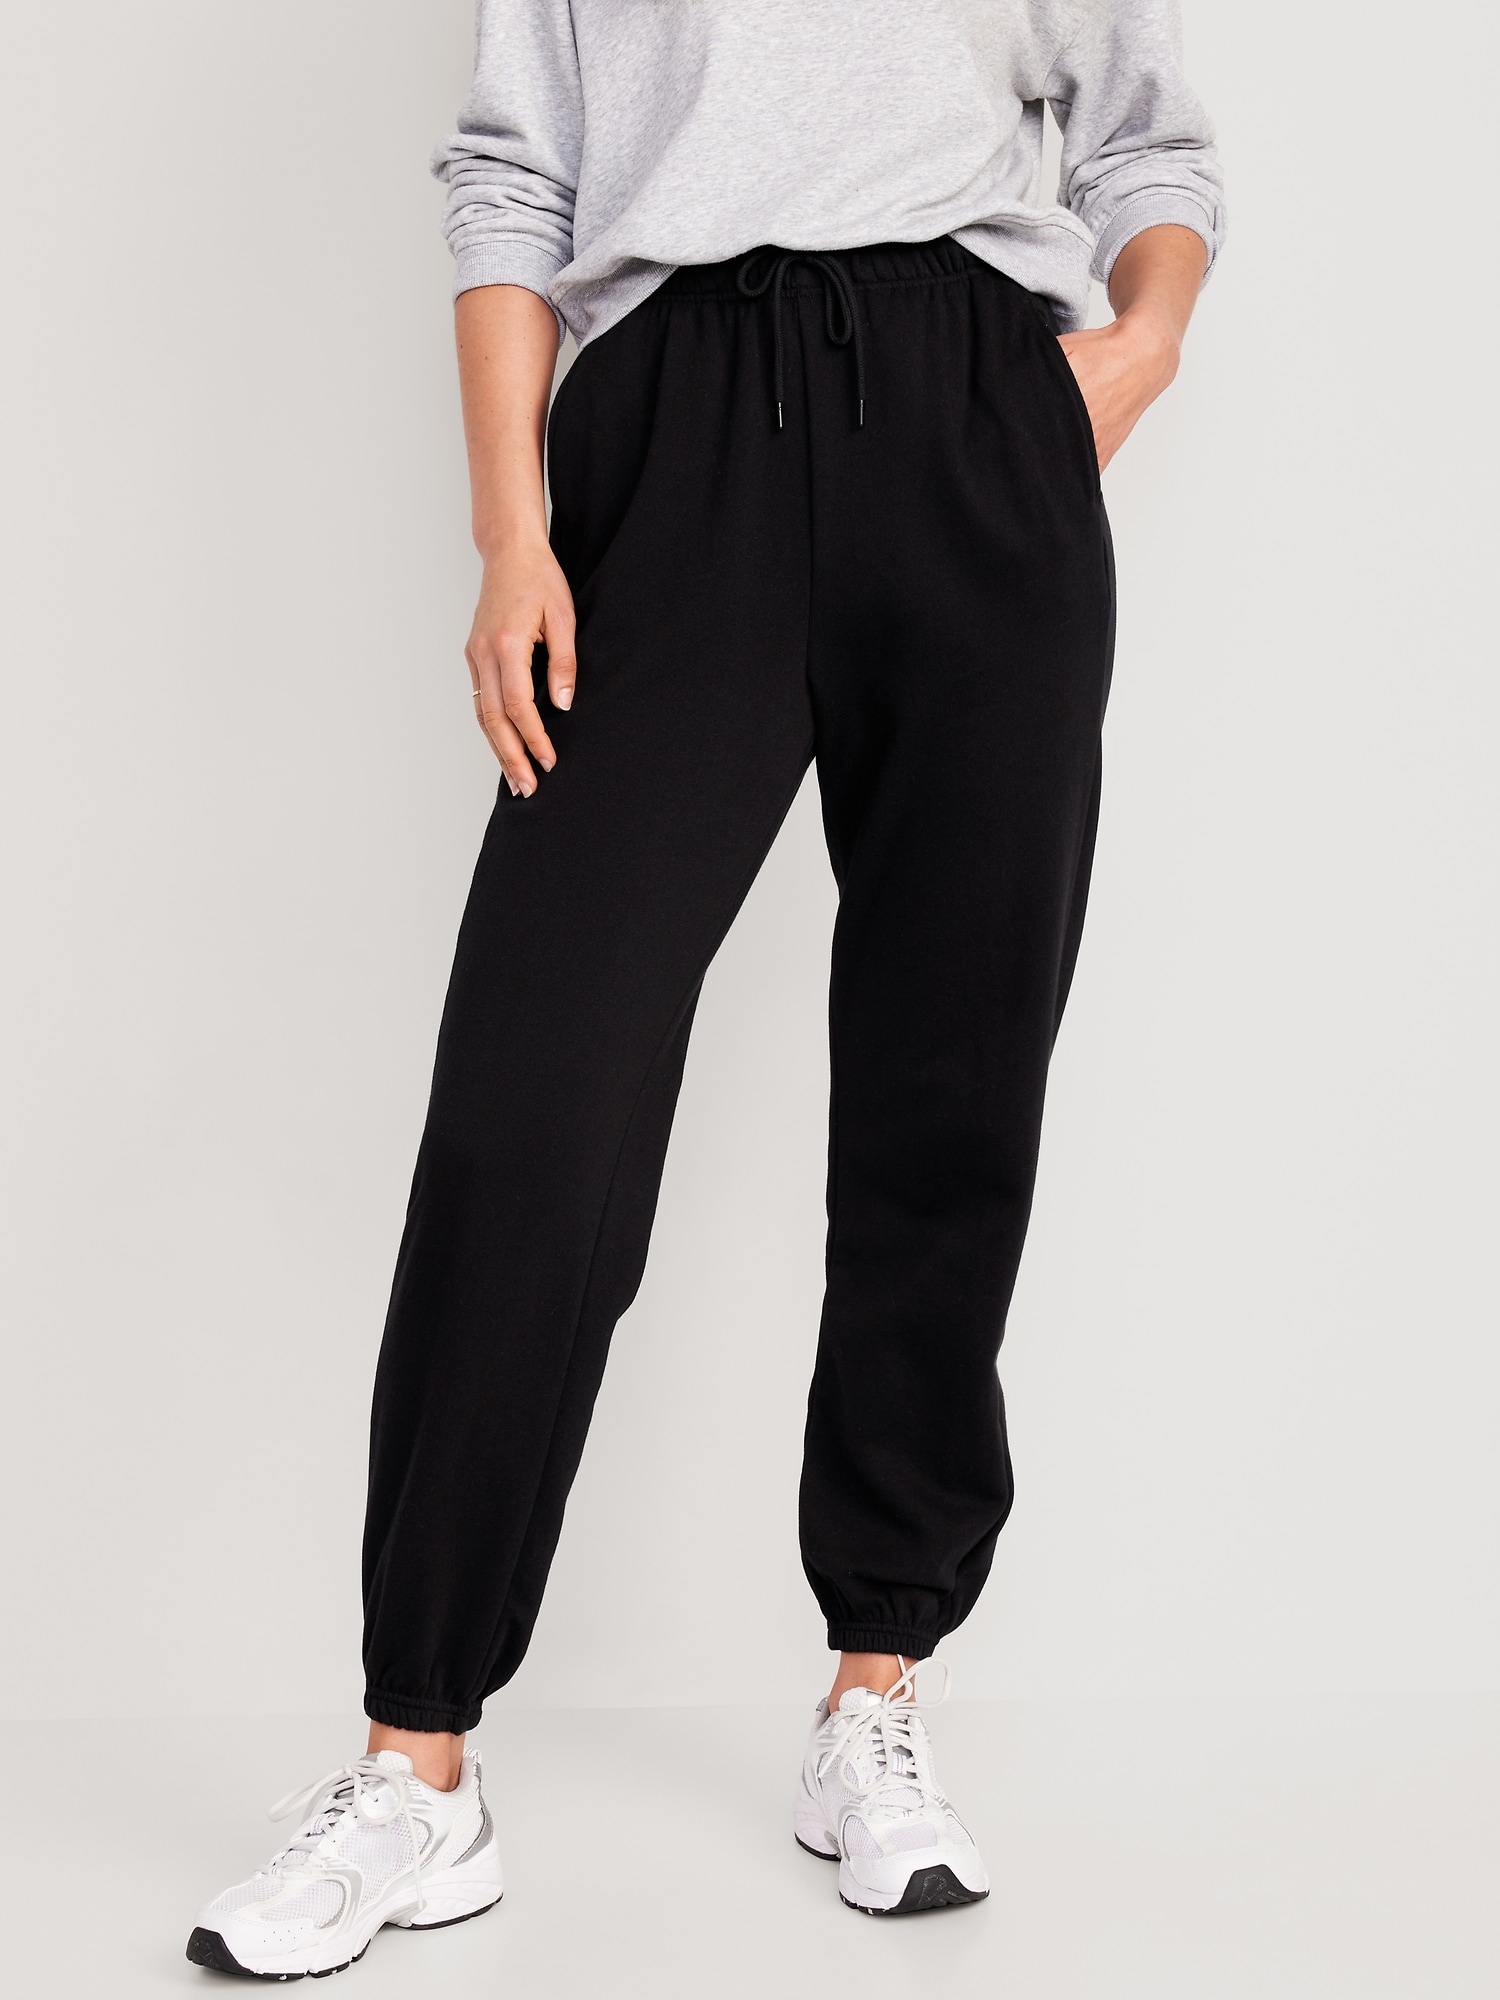 Extra High-Waisted Jogger Sweatpants | Old Navy